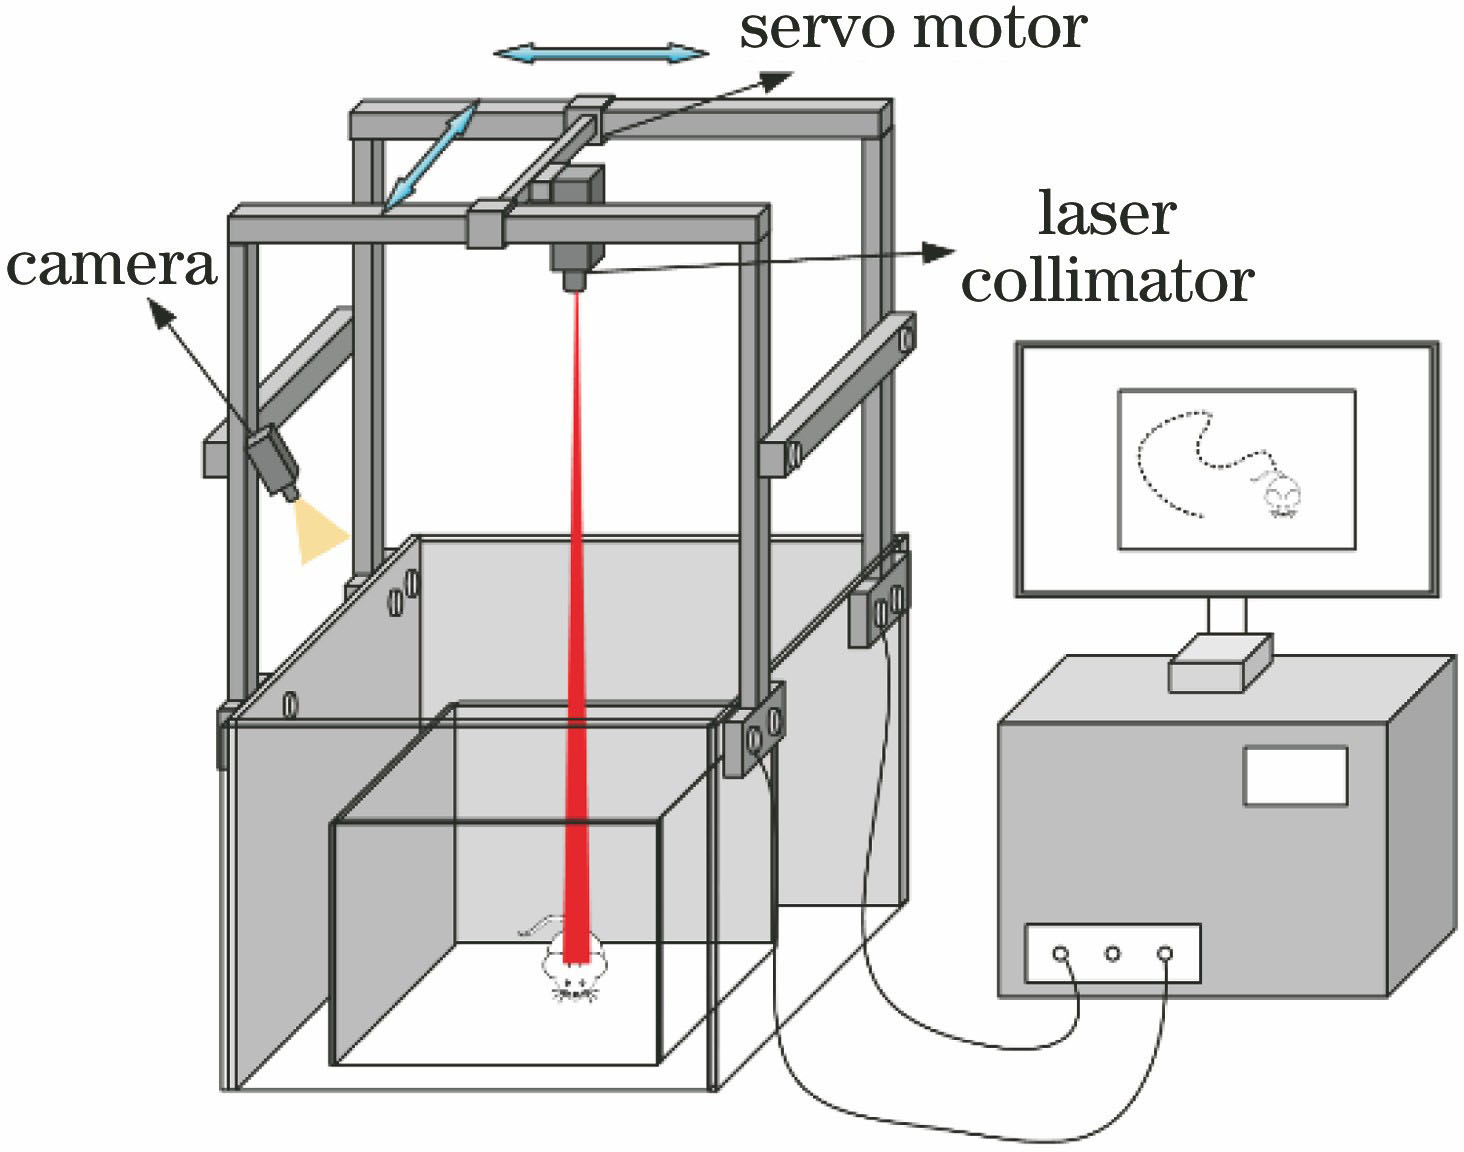 Schematic of the laser projection system